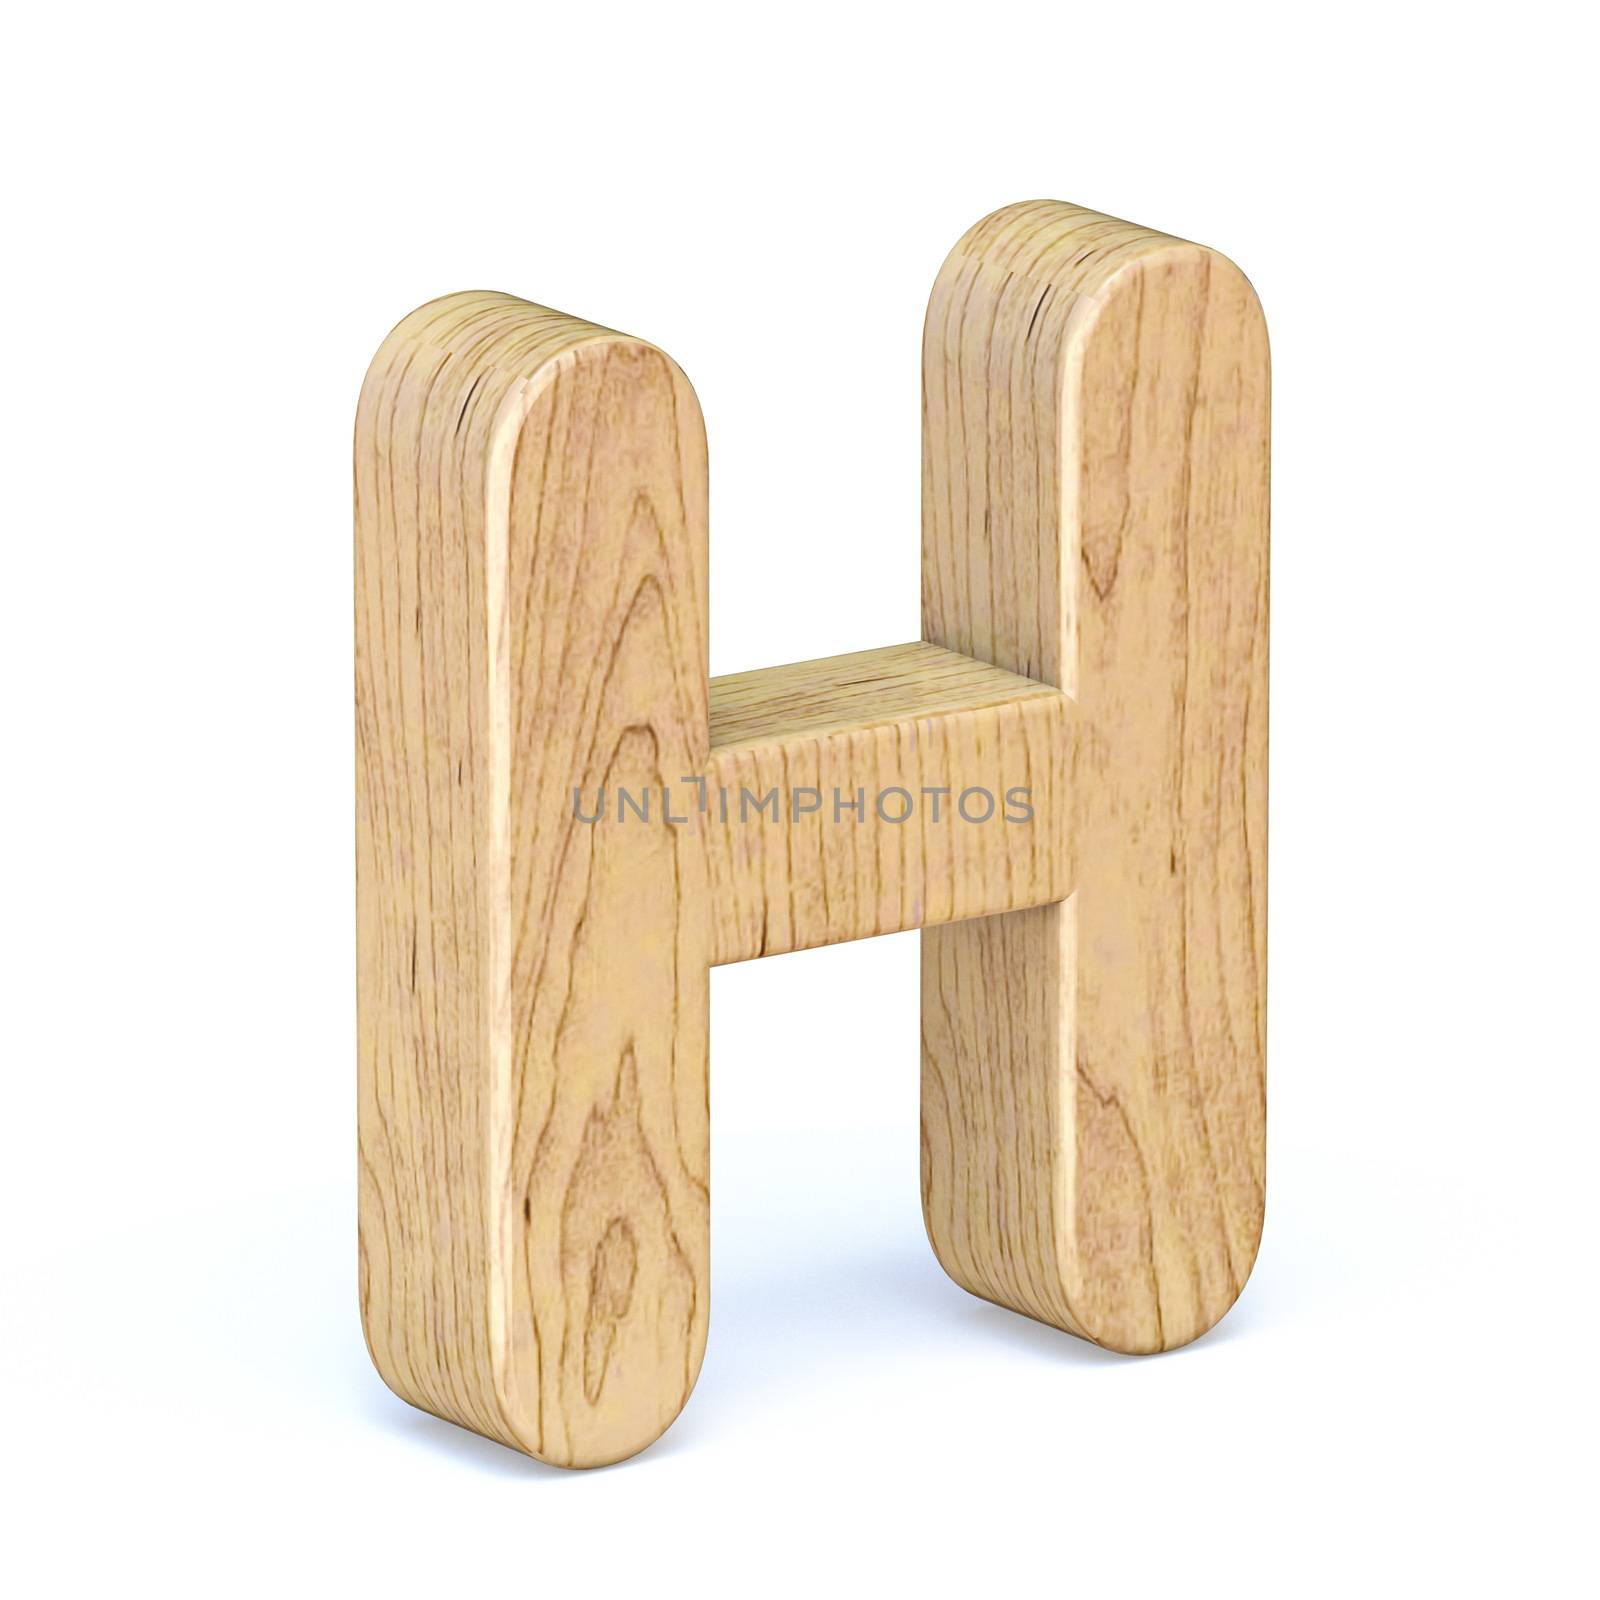 Rounded wooden font Letter H 3D by djmilic